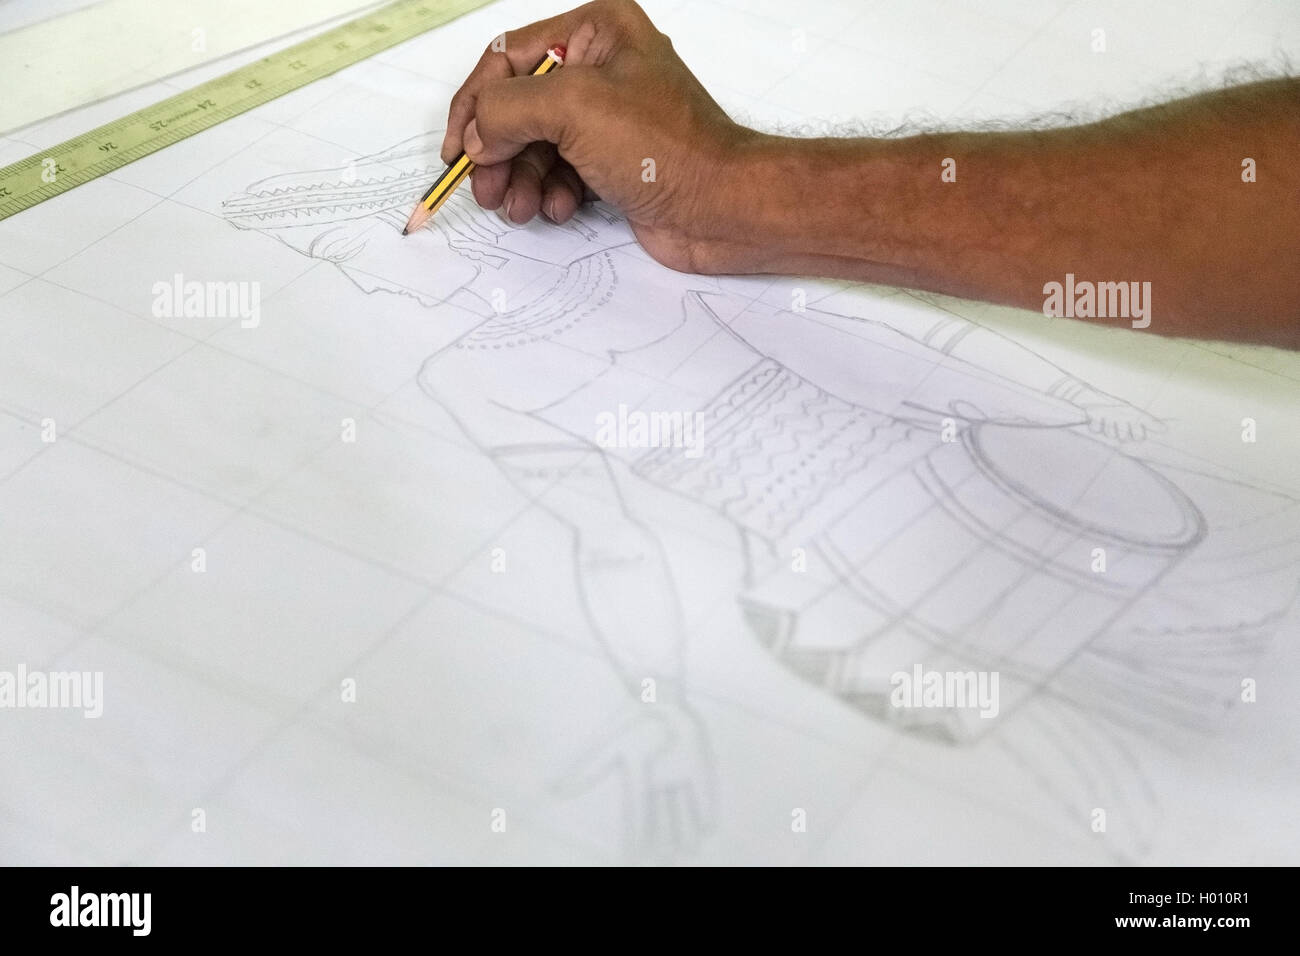 COLOMBO, SRI LANKA - MARCH 12, 2014: Local man drawing batik designs. The manufacture and export of textile products is one of t Stock Photo